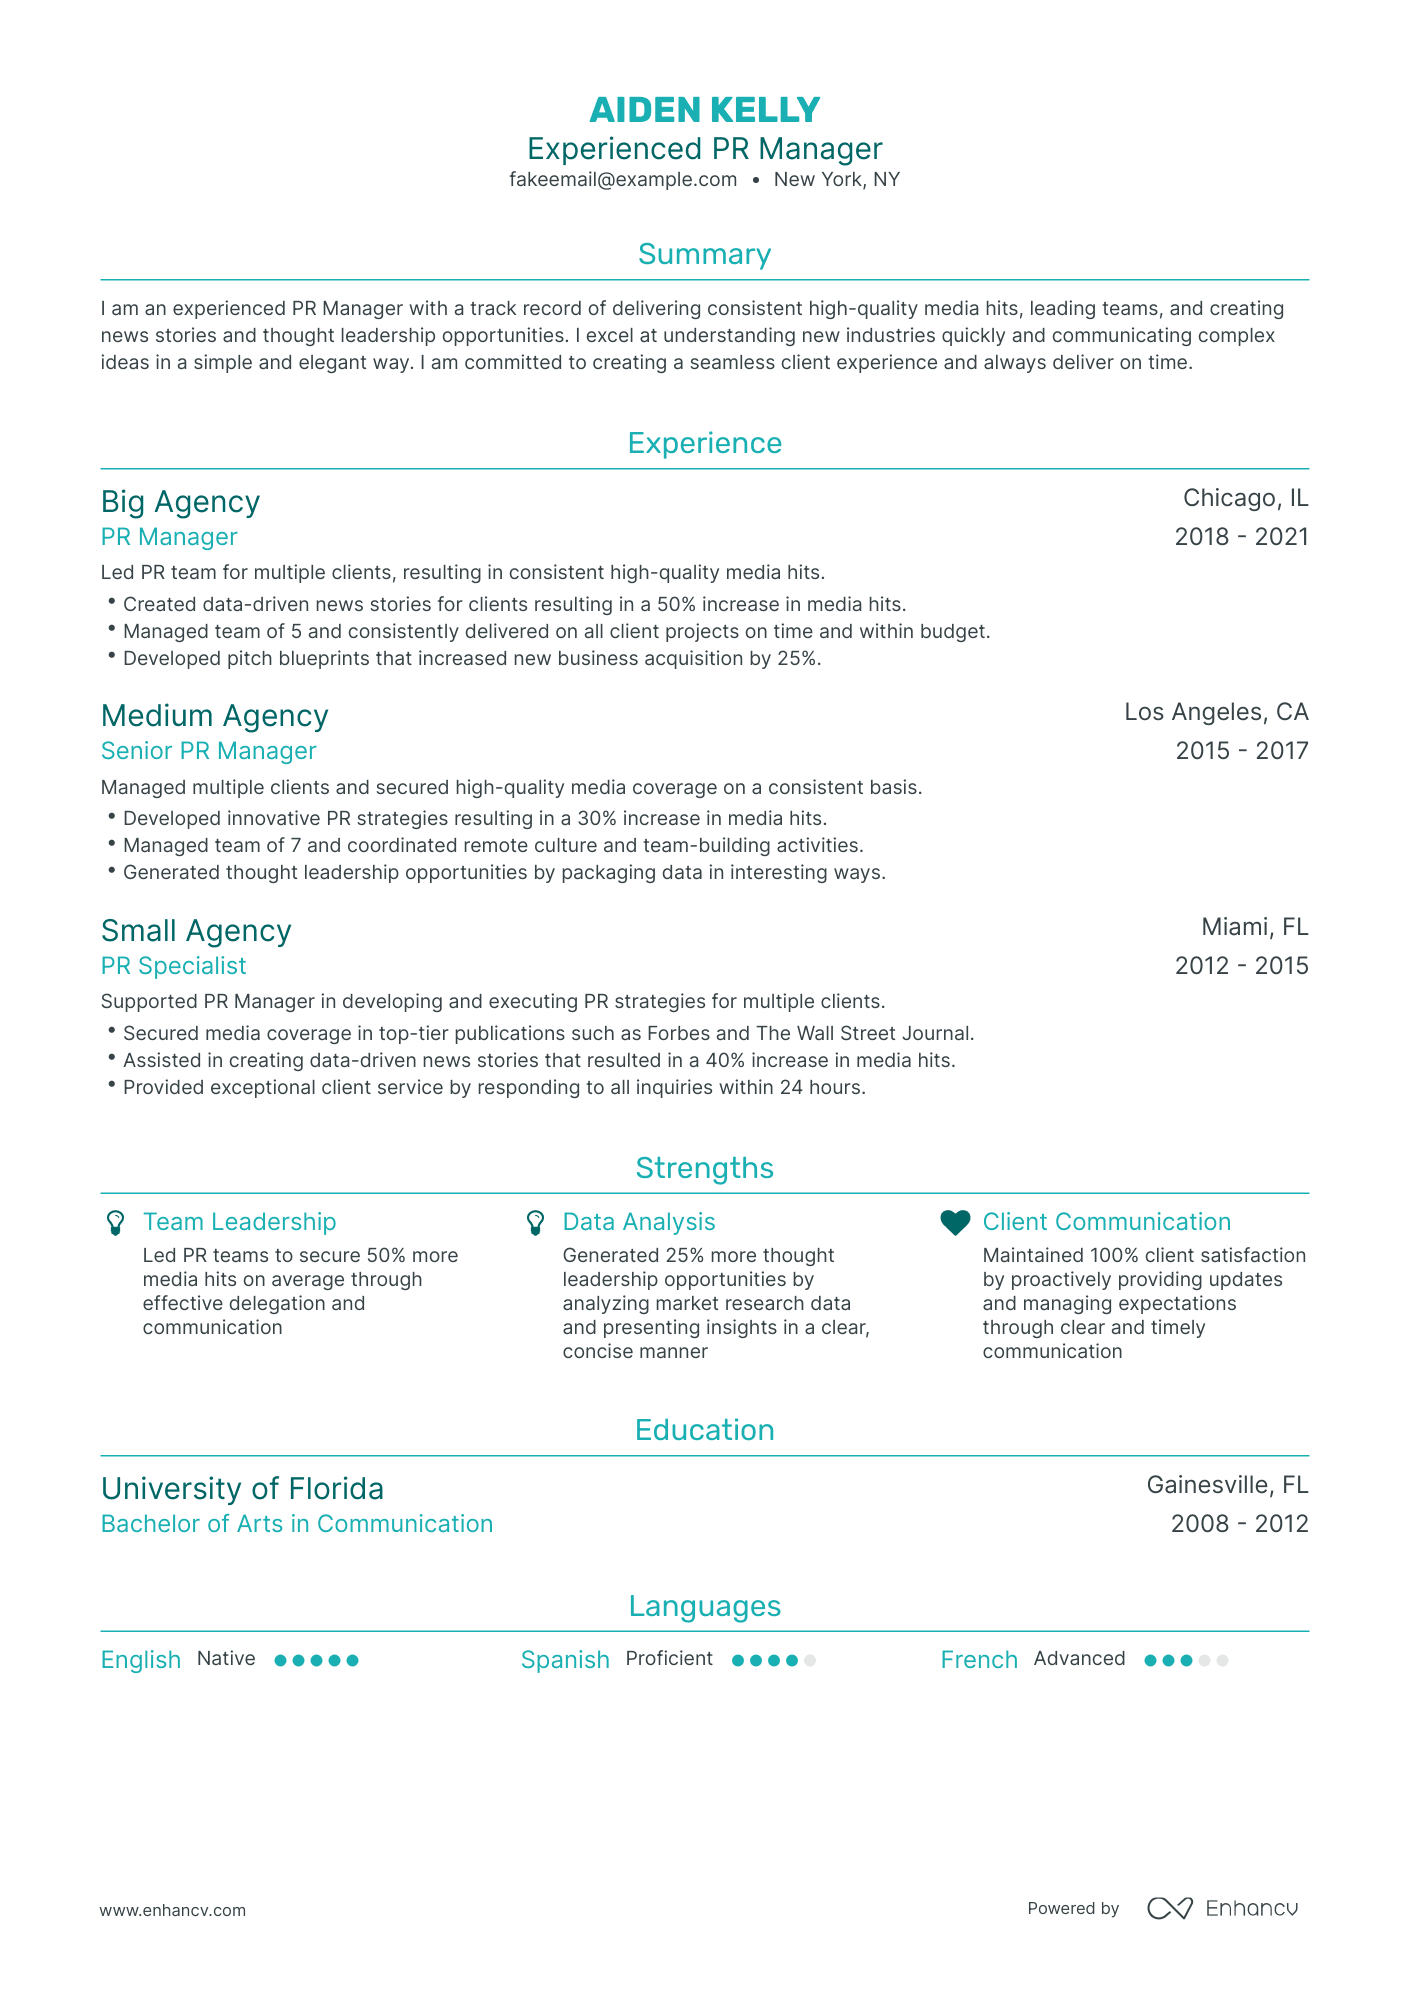 Traditional Public Relations Manager Resume Template